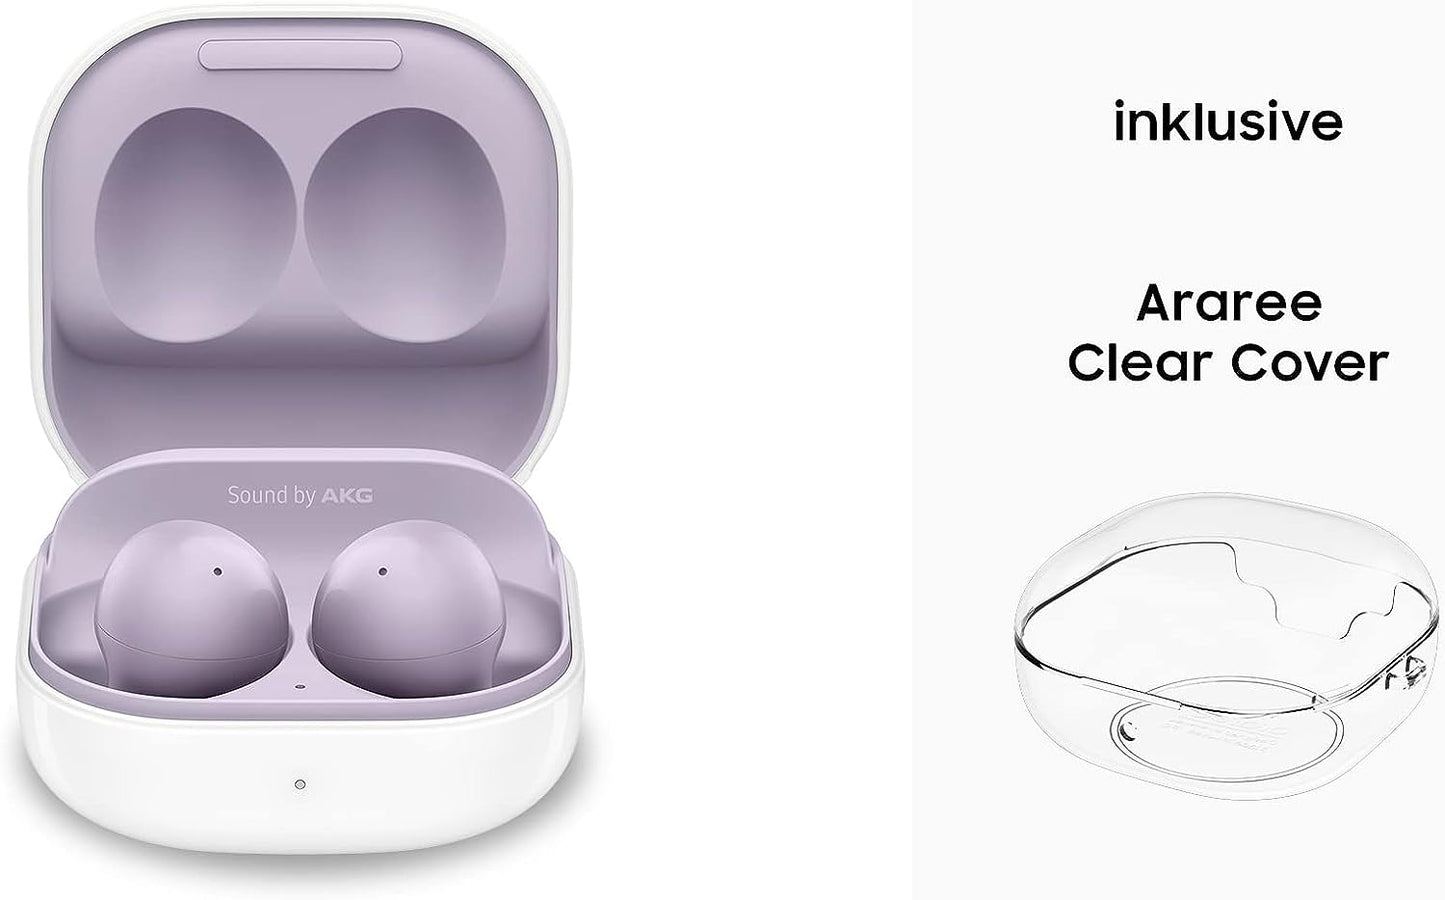 Samsung Galaxy Buds2, wireless headphones, wireless earbuds, noise cancellation (ANC), long-lasting battery, 3 microphones, incl. Araree Nukin Clear Cover, Lavender 